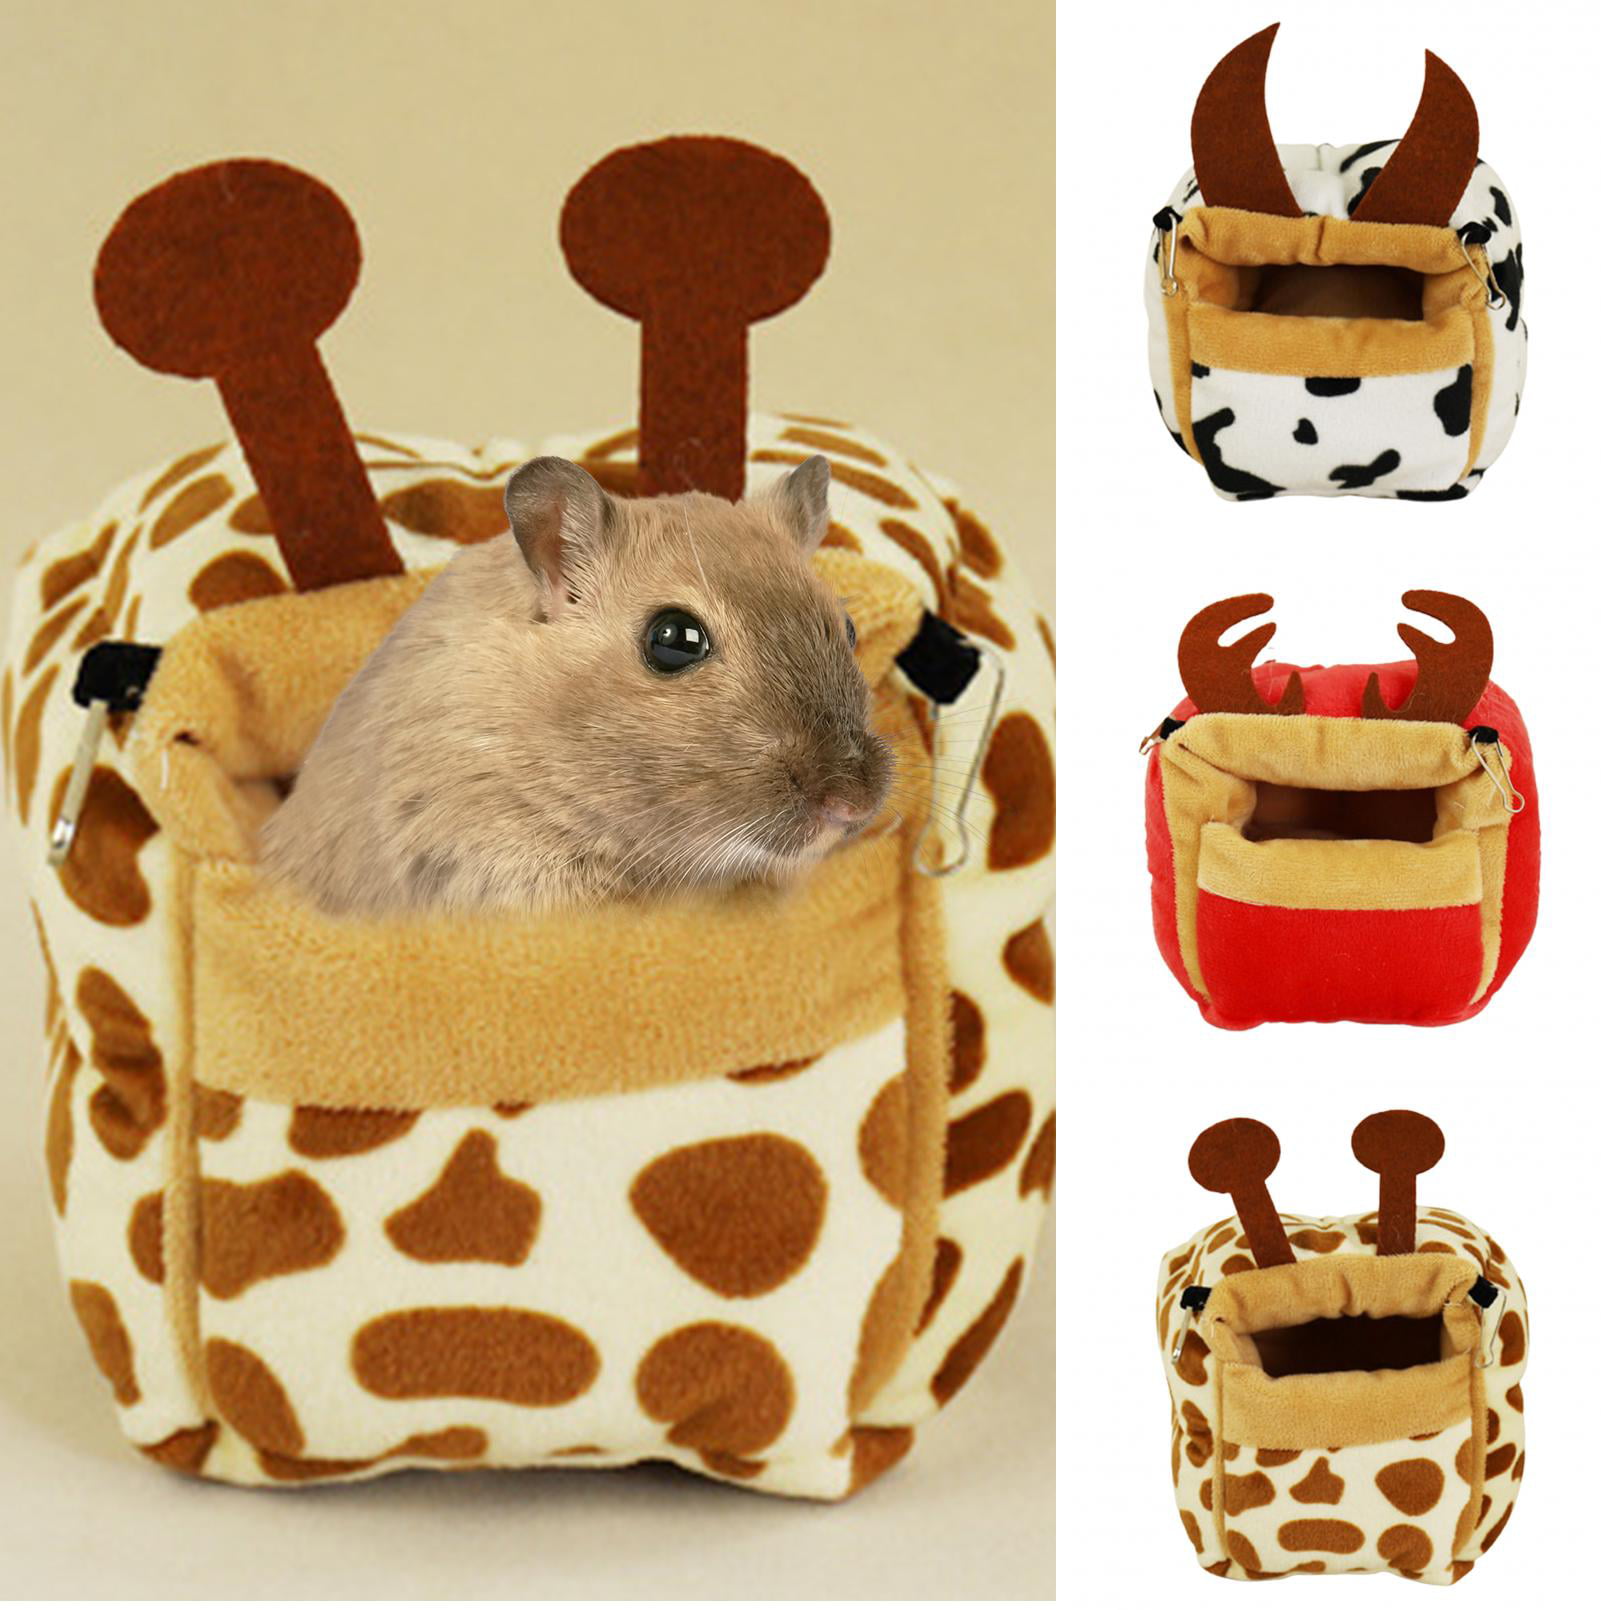 Hamster House Bed Small Pet Squirrel Hedgehog Chinchilla Guinea Pig Bed House Cage Nest Hamster Accessories Bed for Hamster ferret rabbit Animals Small Cotton Sleep Nest House Hanging new yellow 